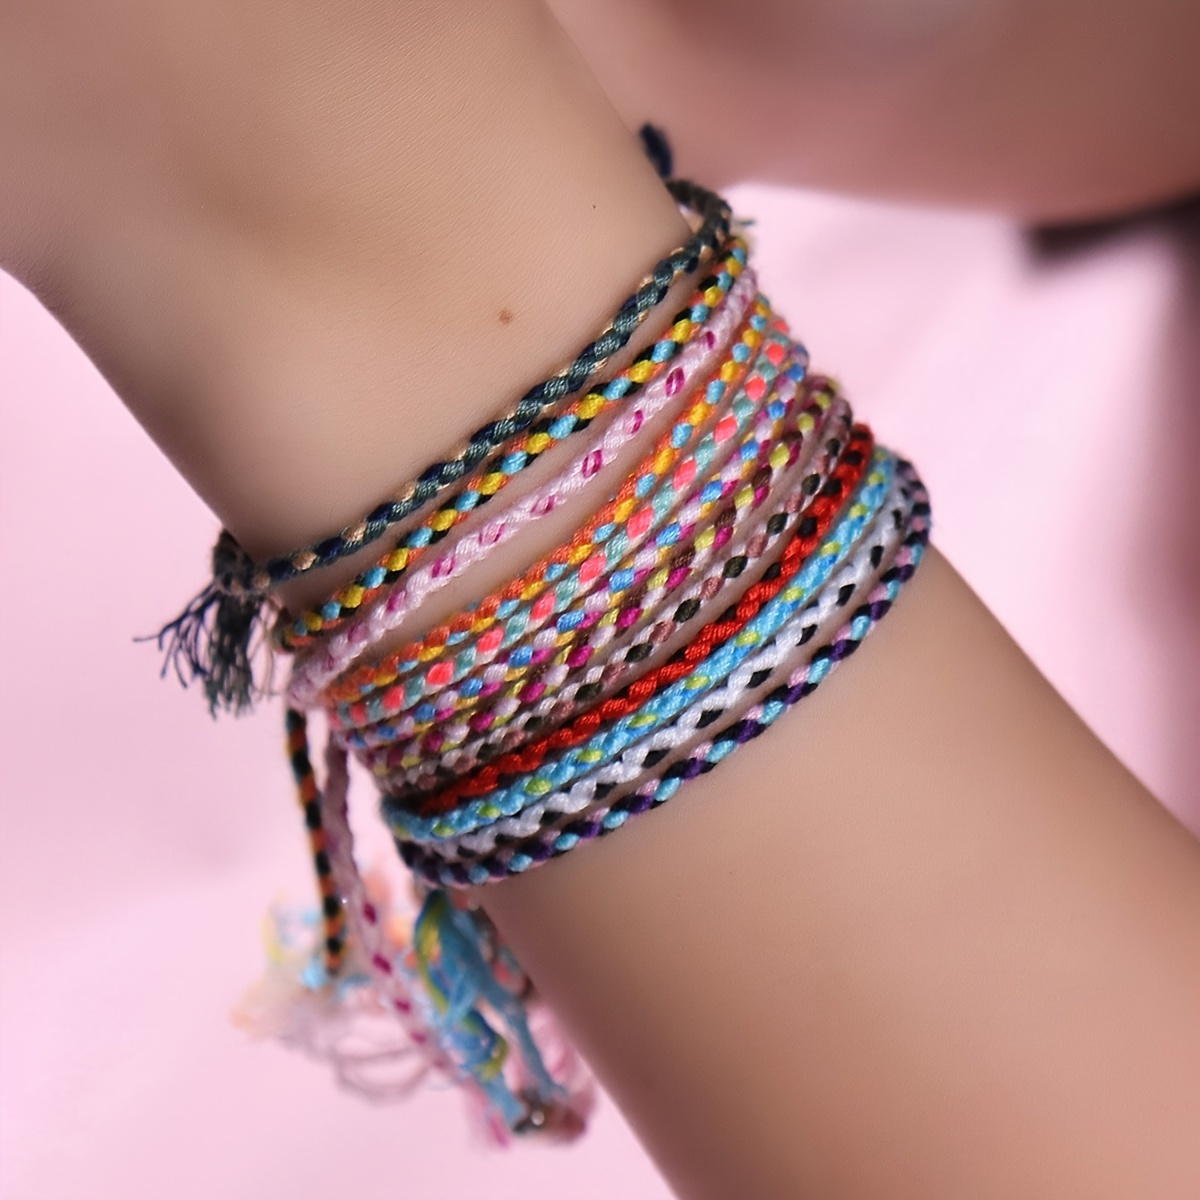 

12pcs Colorful Braided Bracelets Set Adjustable Boho Style Bracelet Set Charms Jewelry Gifts For Teen Girls Daughter Sister Best Friend Friendship Her